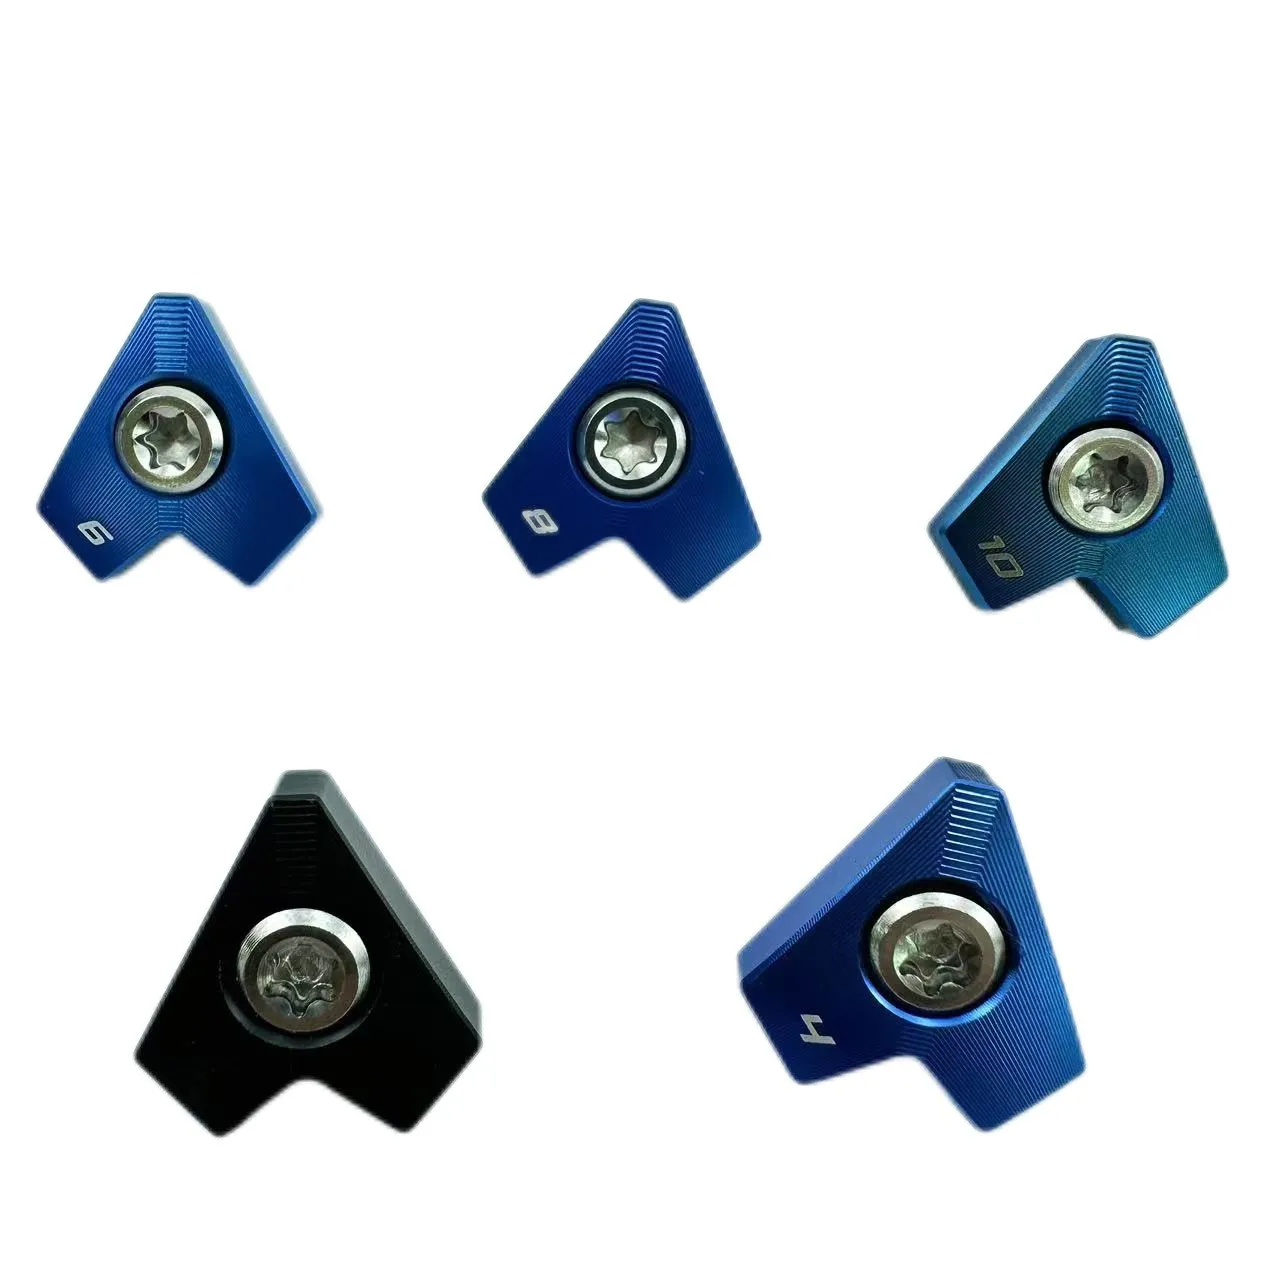 

1Pcs Golf Club Head Weights Fit for Cobra AEROJET AEROJET MAX Driver Choice 3g/4g/6g/8g/10g/12g/13g/14g/15g/16g Golf weight